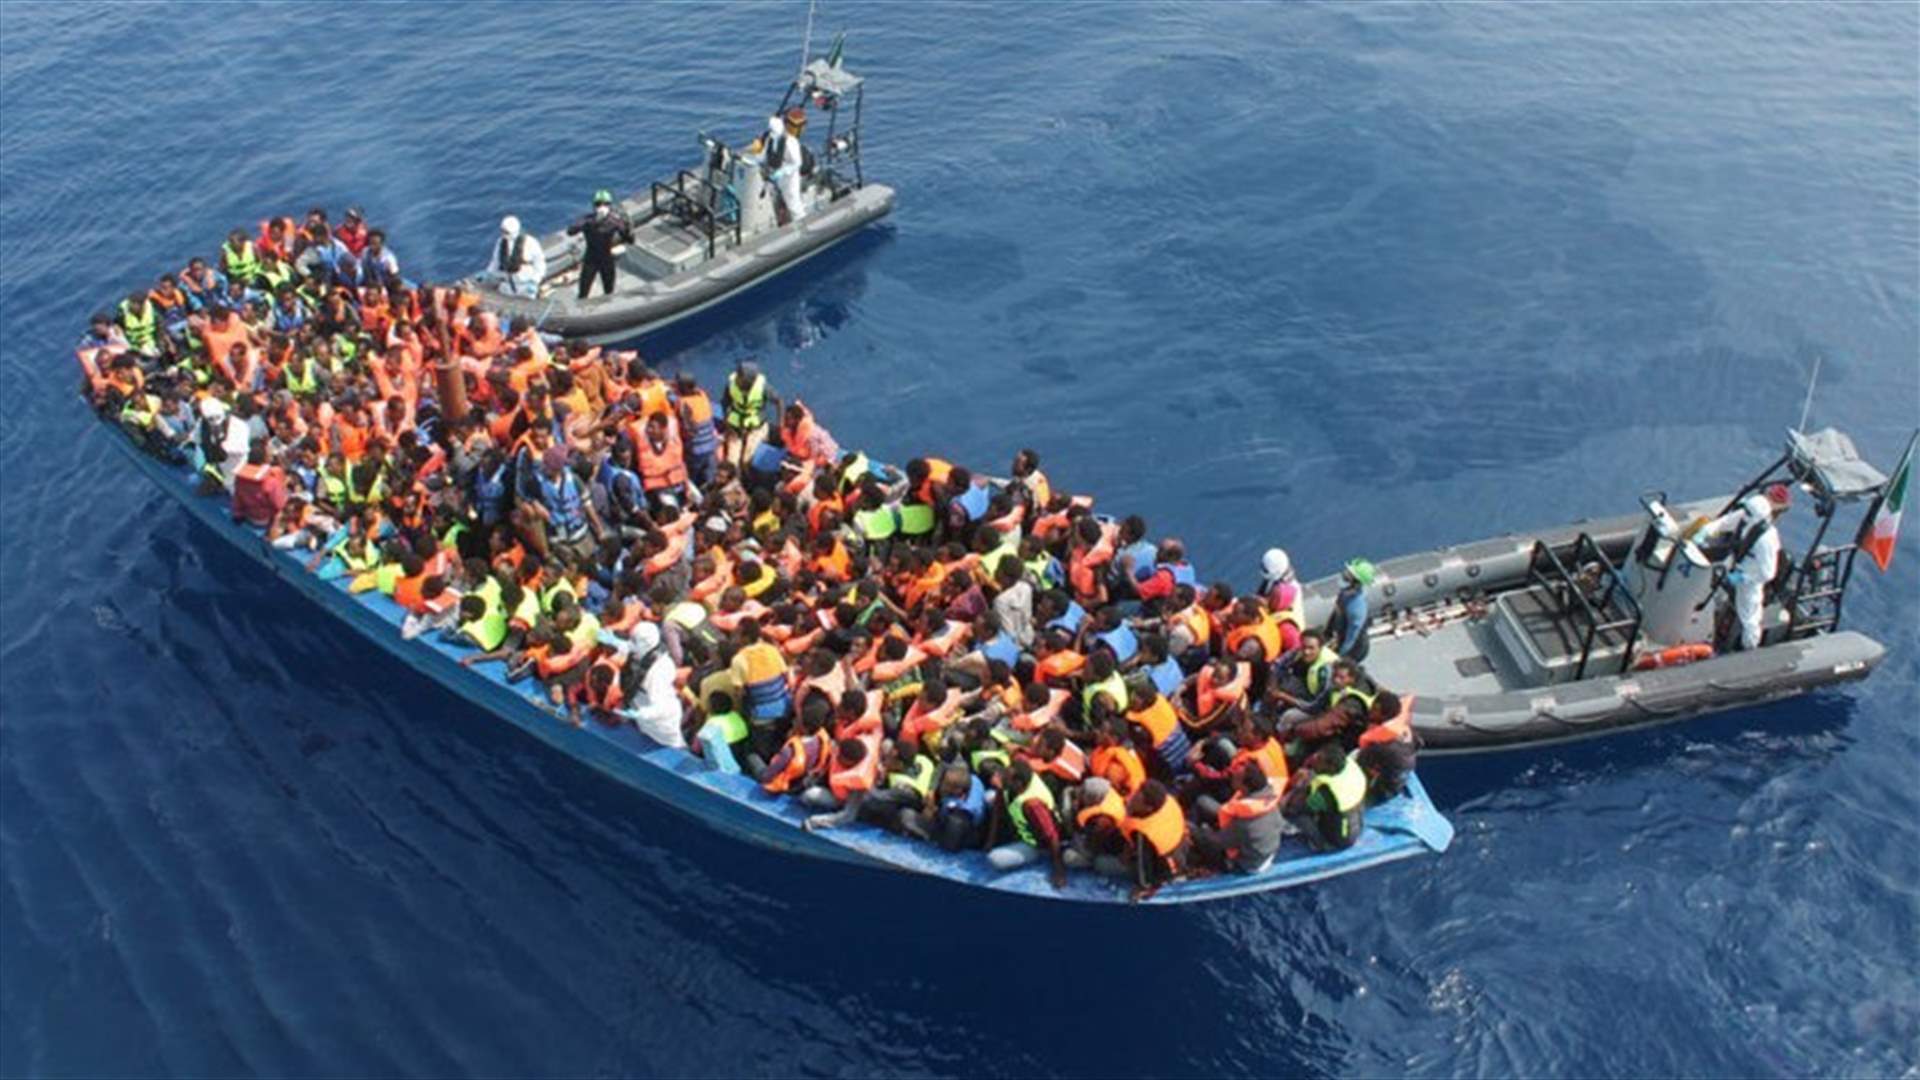 Libyan coastguard picks up almost 1,000 migrants in one day